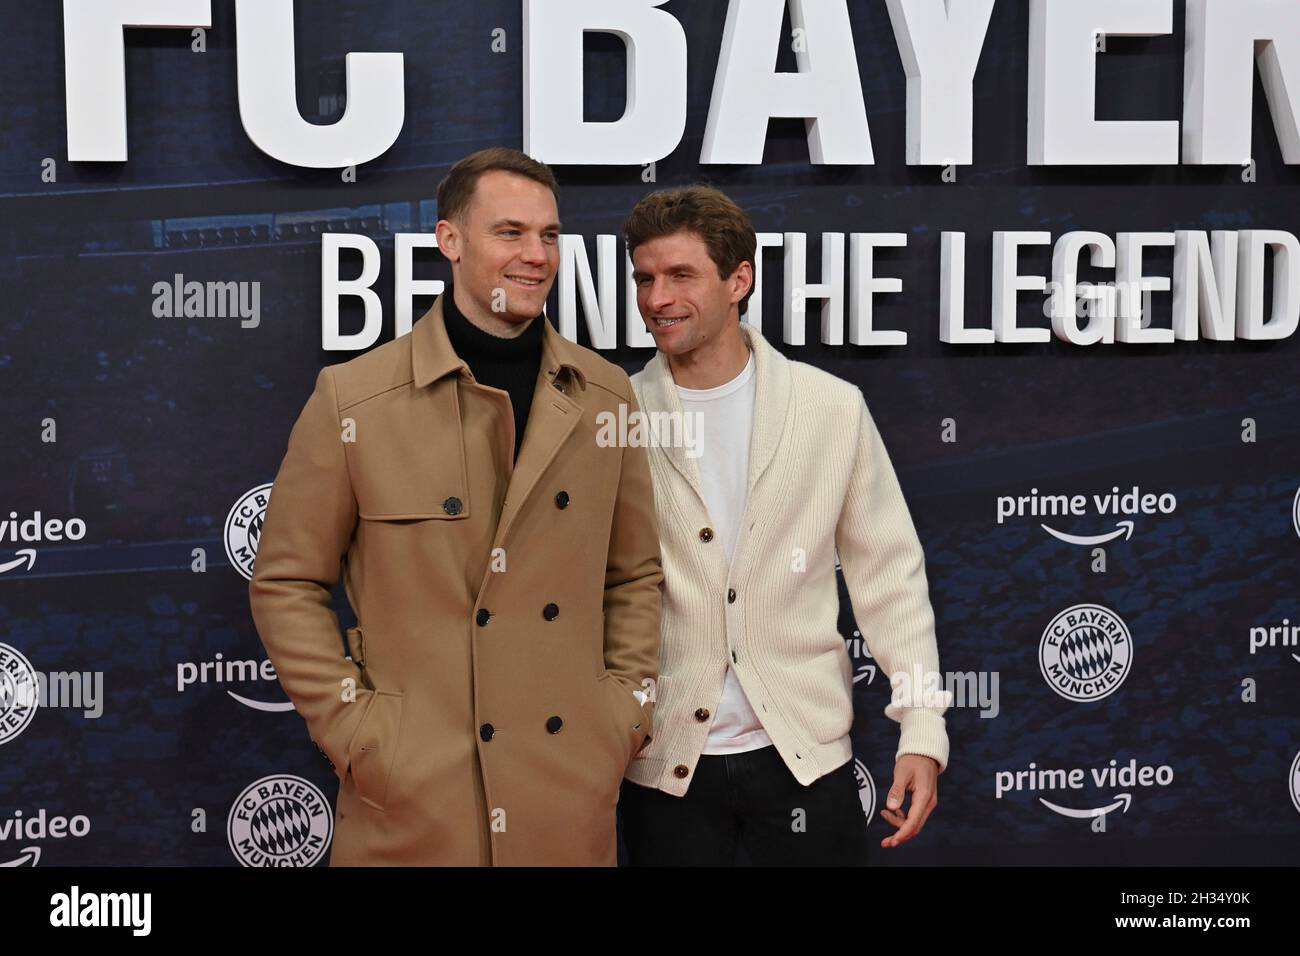 From left: Manuel NEUER (goalwart FC Bayern Munich), Thomas MUELLER  (MÜLLER, FC Bayern Munich) in civil, private. Premiere party for the Amazon  Original Documentary FC BAYERN - BEHIND THE LEGEND on October